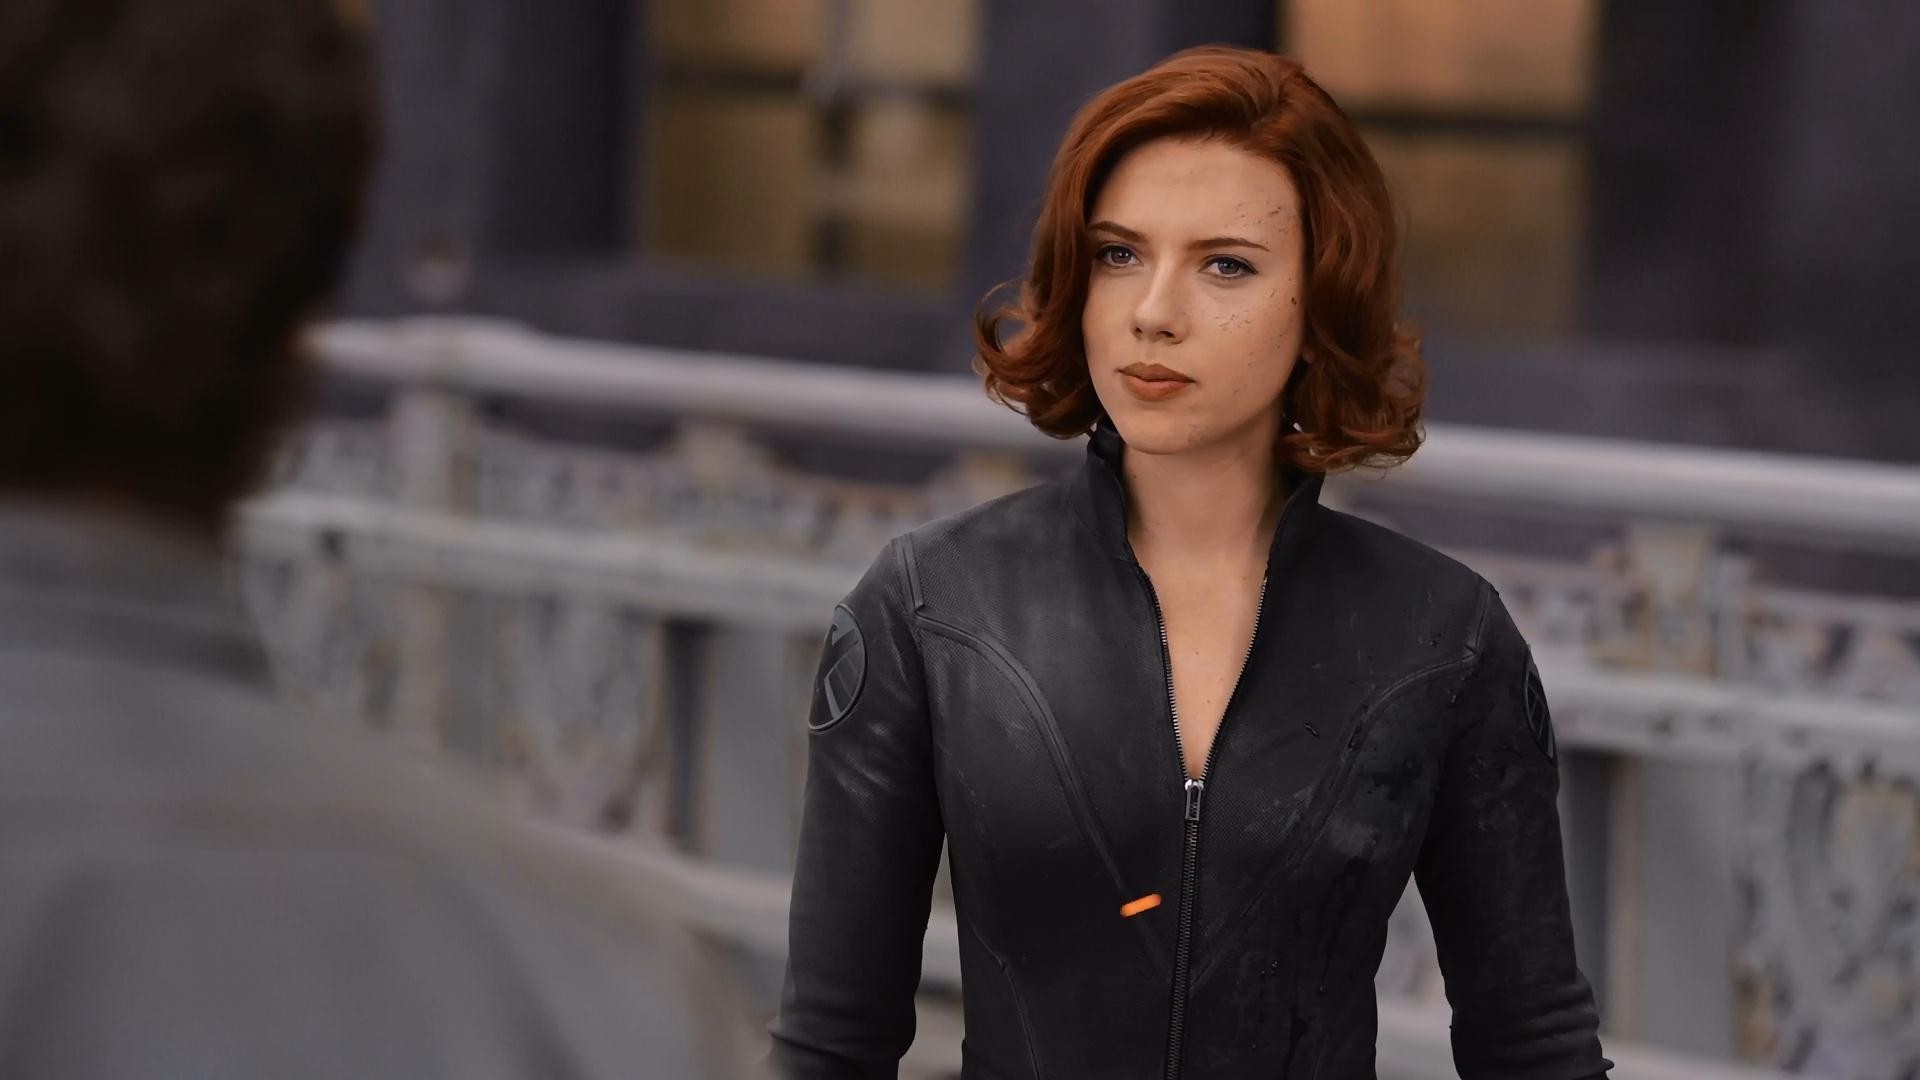 movies, The Avengers, Black Widow, Scarlett Johansson Wallpapers HD /  Desktop and Mobile Backgrounds